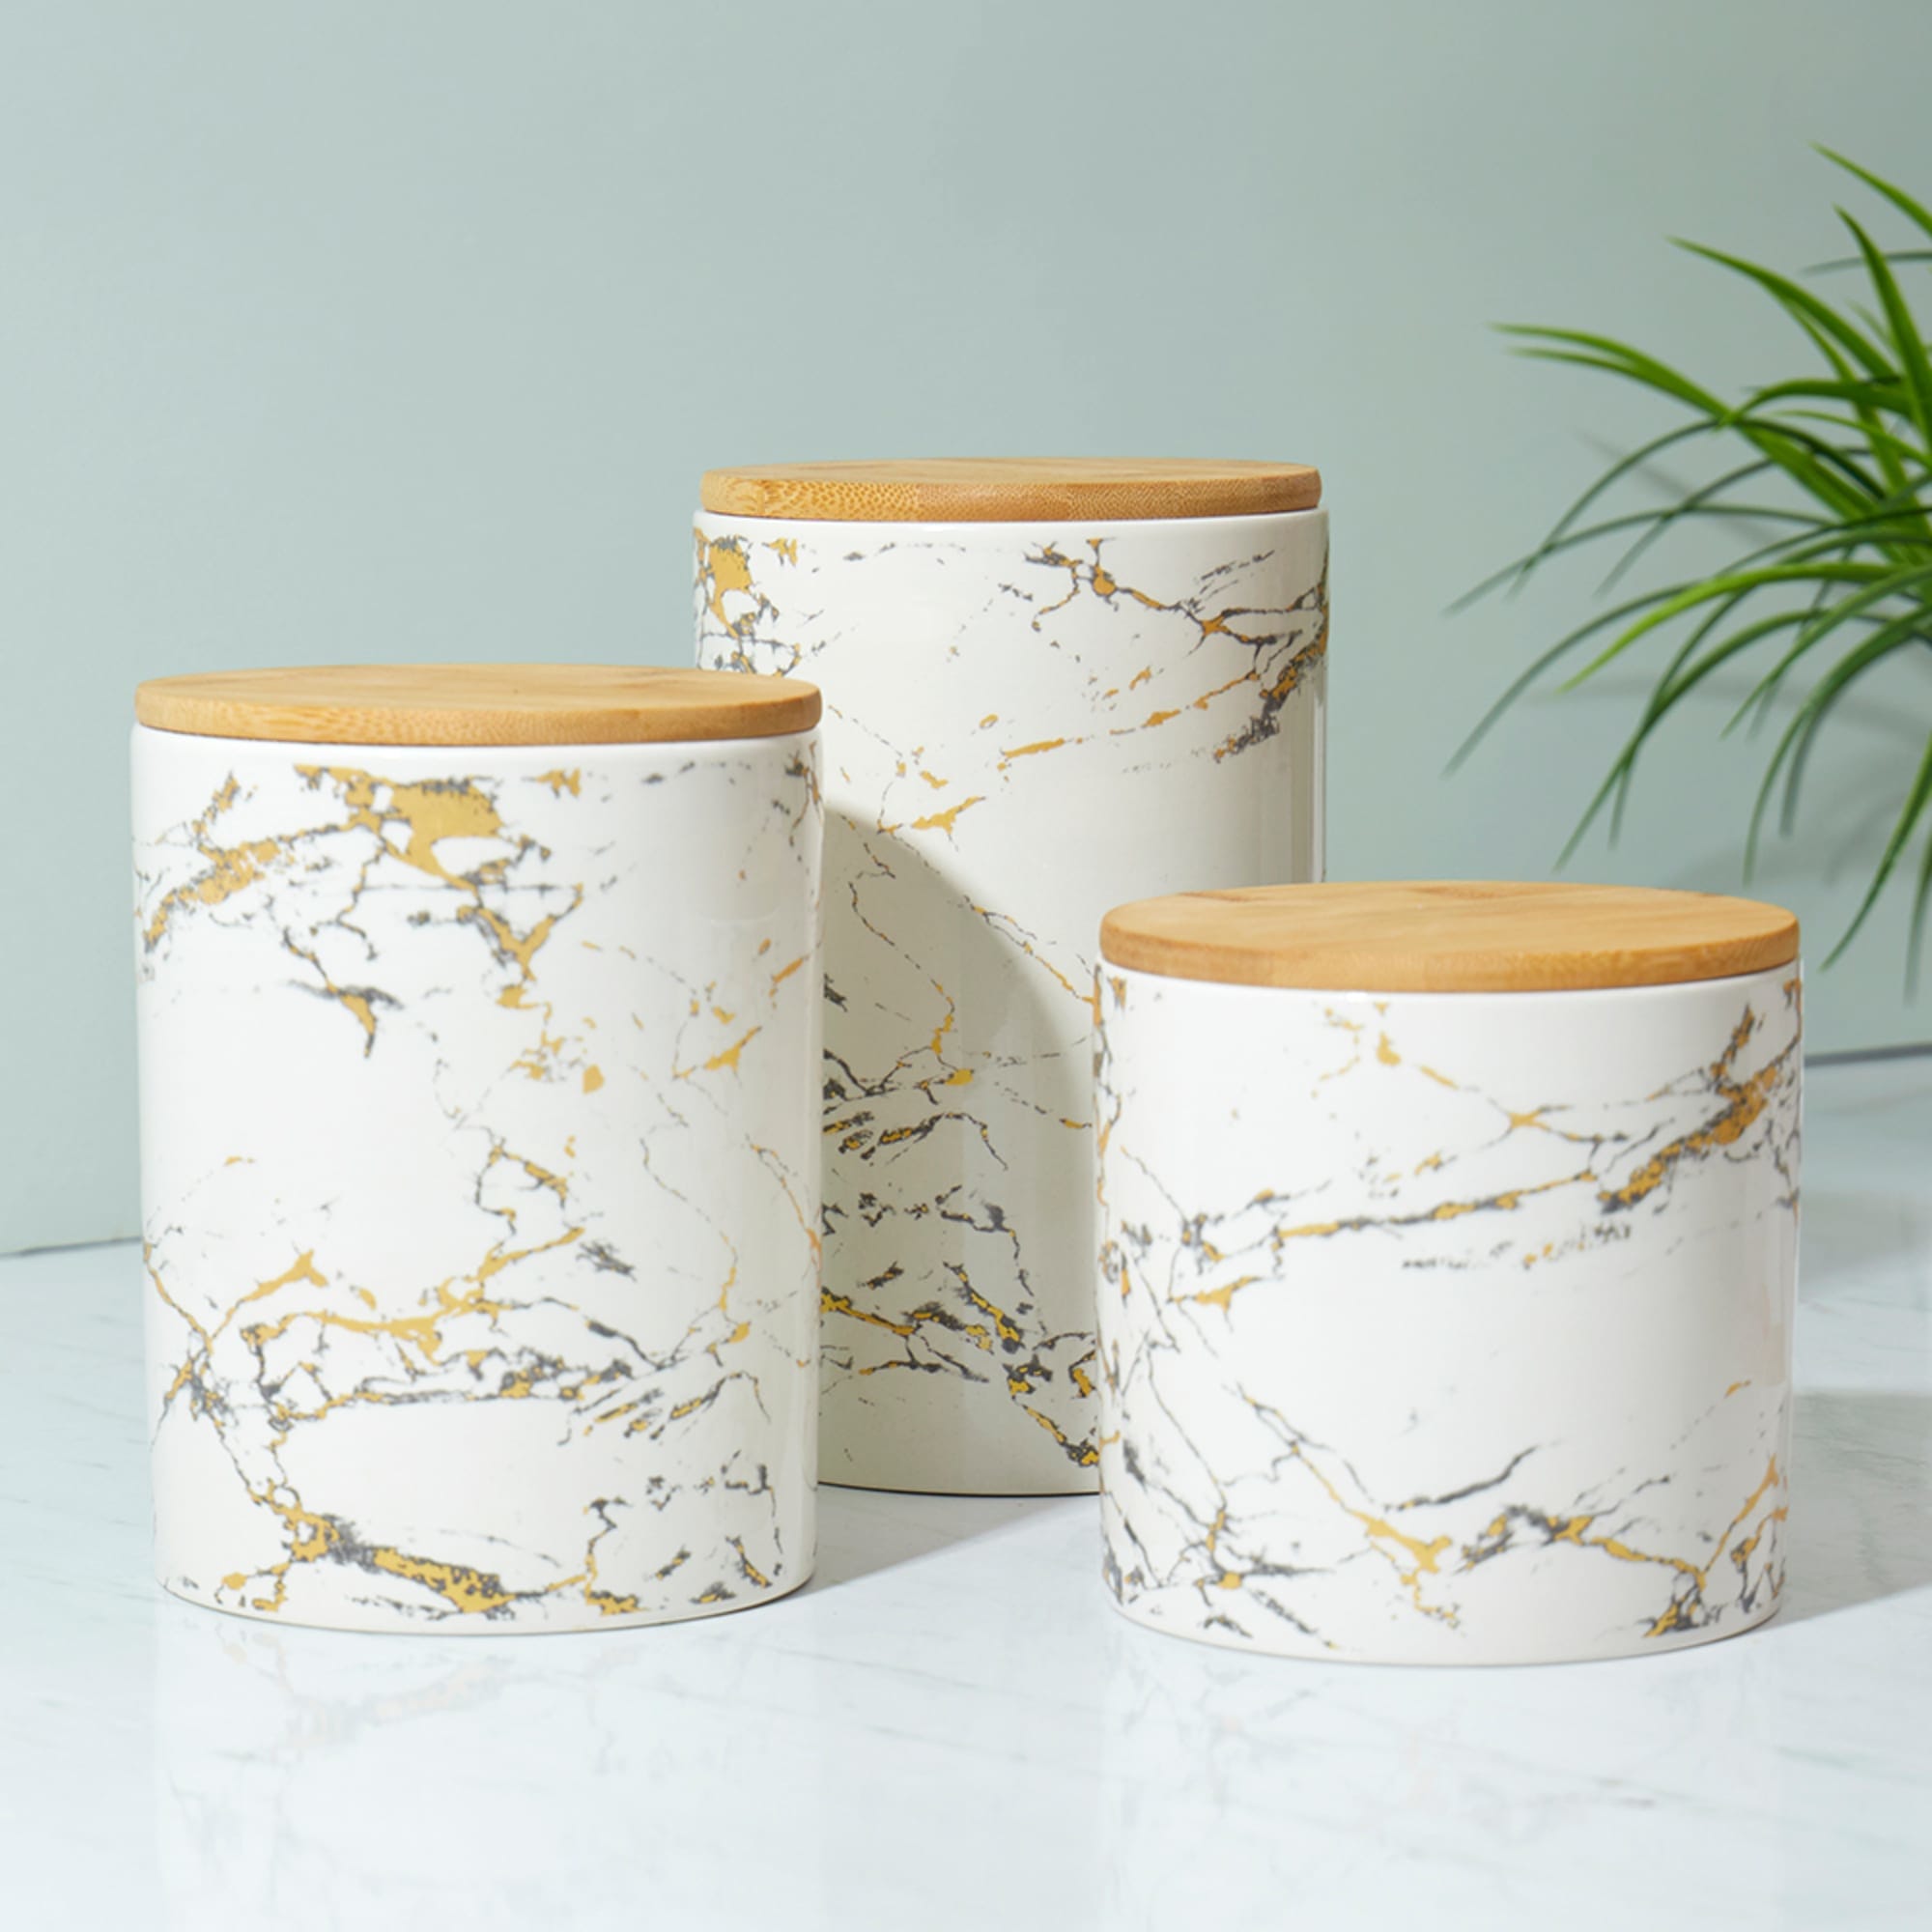 Home Basics 3 Piece Marble Print Ceramic Canister Set With Bamboo Tops, White $20.00 EACH, CASE PACK OF 3